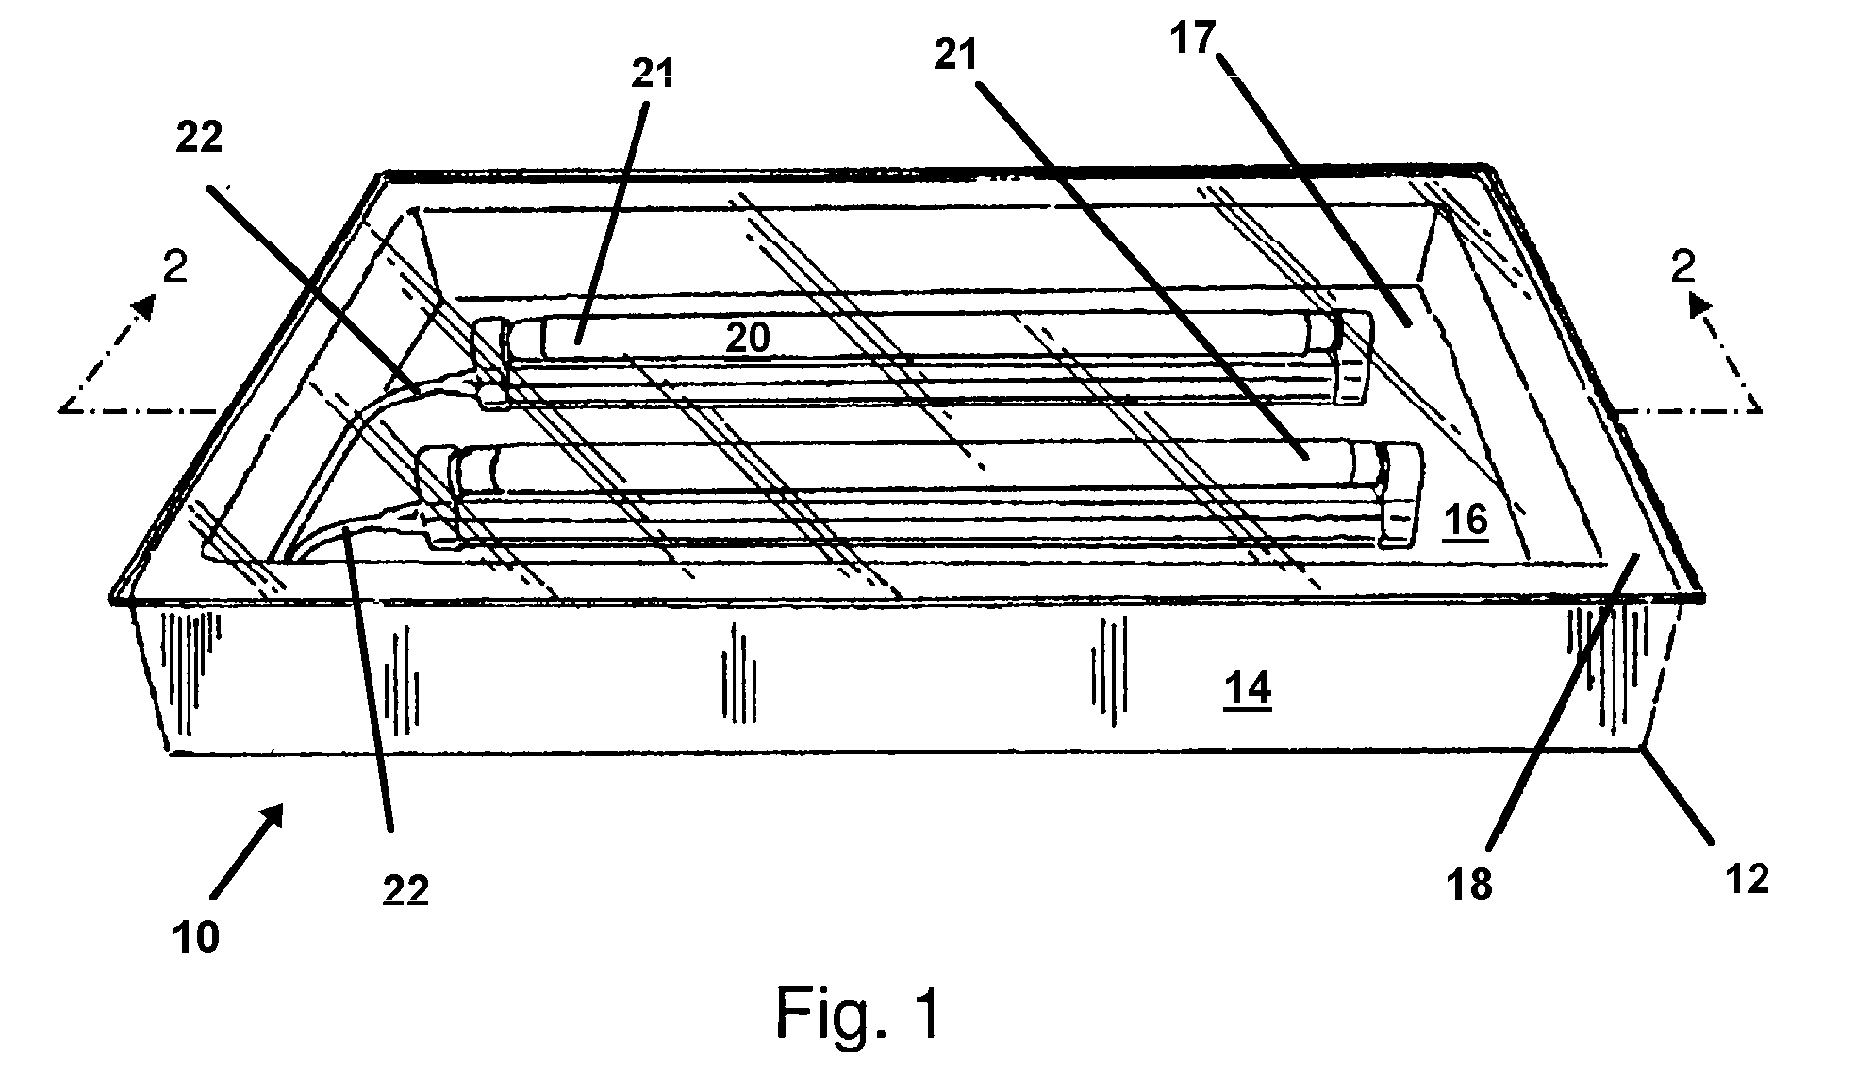 Apparatus and Method for Sanitizing Feet and the External Surfaces of Footwear